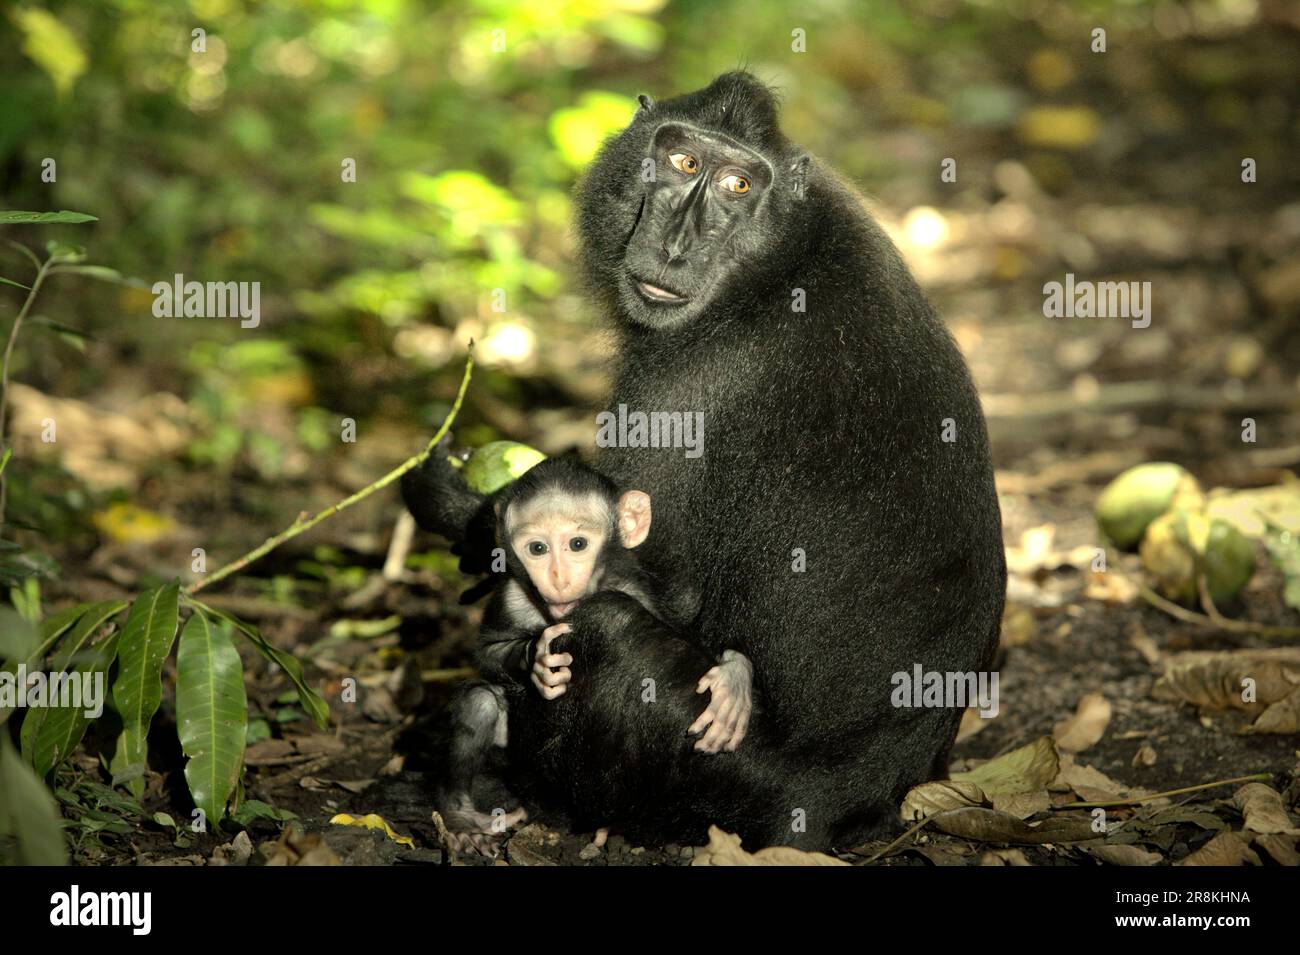 An offspring of Sulawesi black-crested macaque (Macaca nigra) stares at camera as it is being taken care of its mother, that is having a fruit while sitting on the ground in Tangkoko forest, North Sulawesi, Indonesia. Being one of the 25 most endangered primates on earth, Macaca nigra is predicted to be going extinct in 2050, according to the website of Macaca Nigra Project. The species is facing the threats of poaching, habitat loss, and climate change. Stock Photo